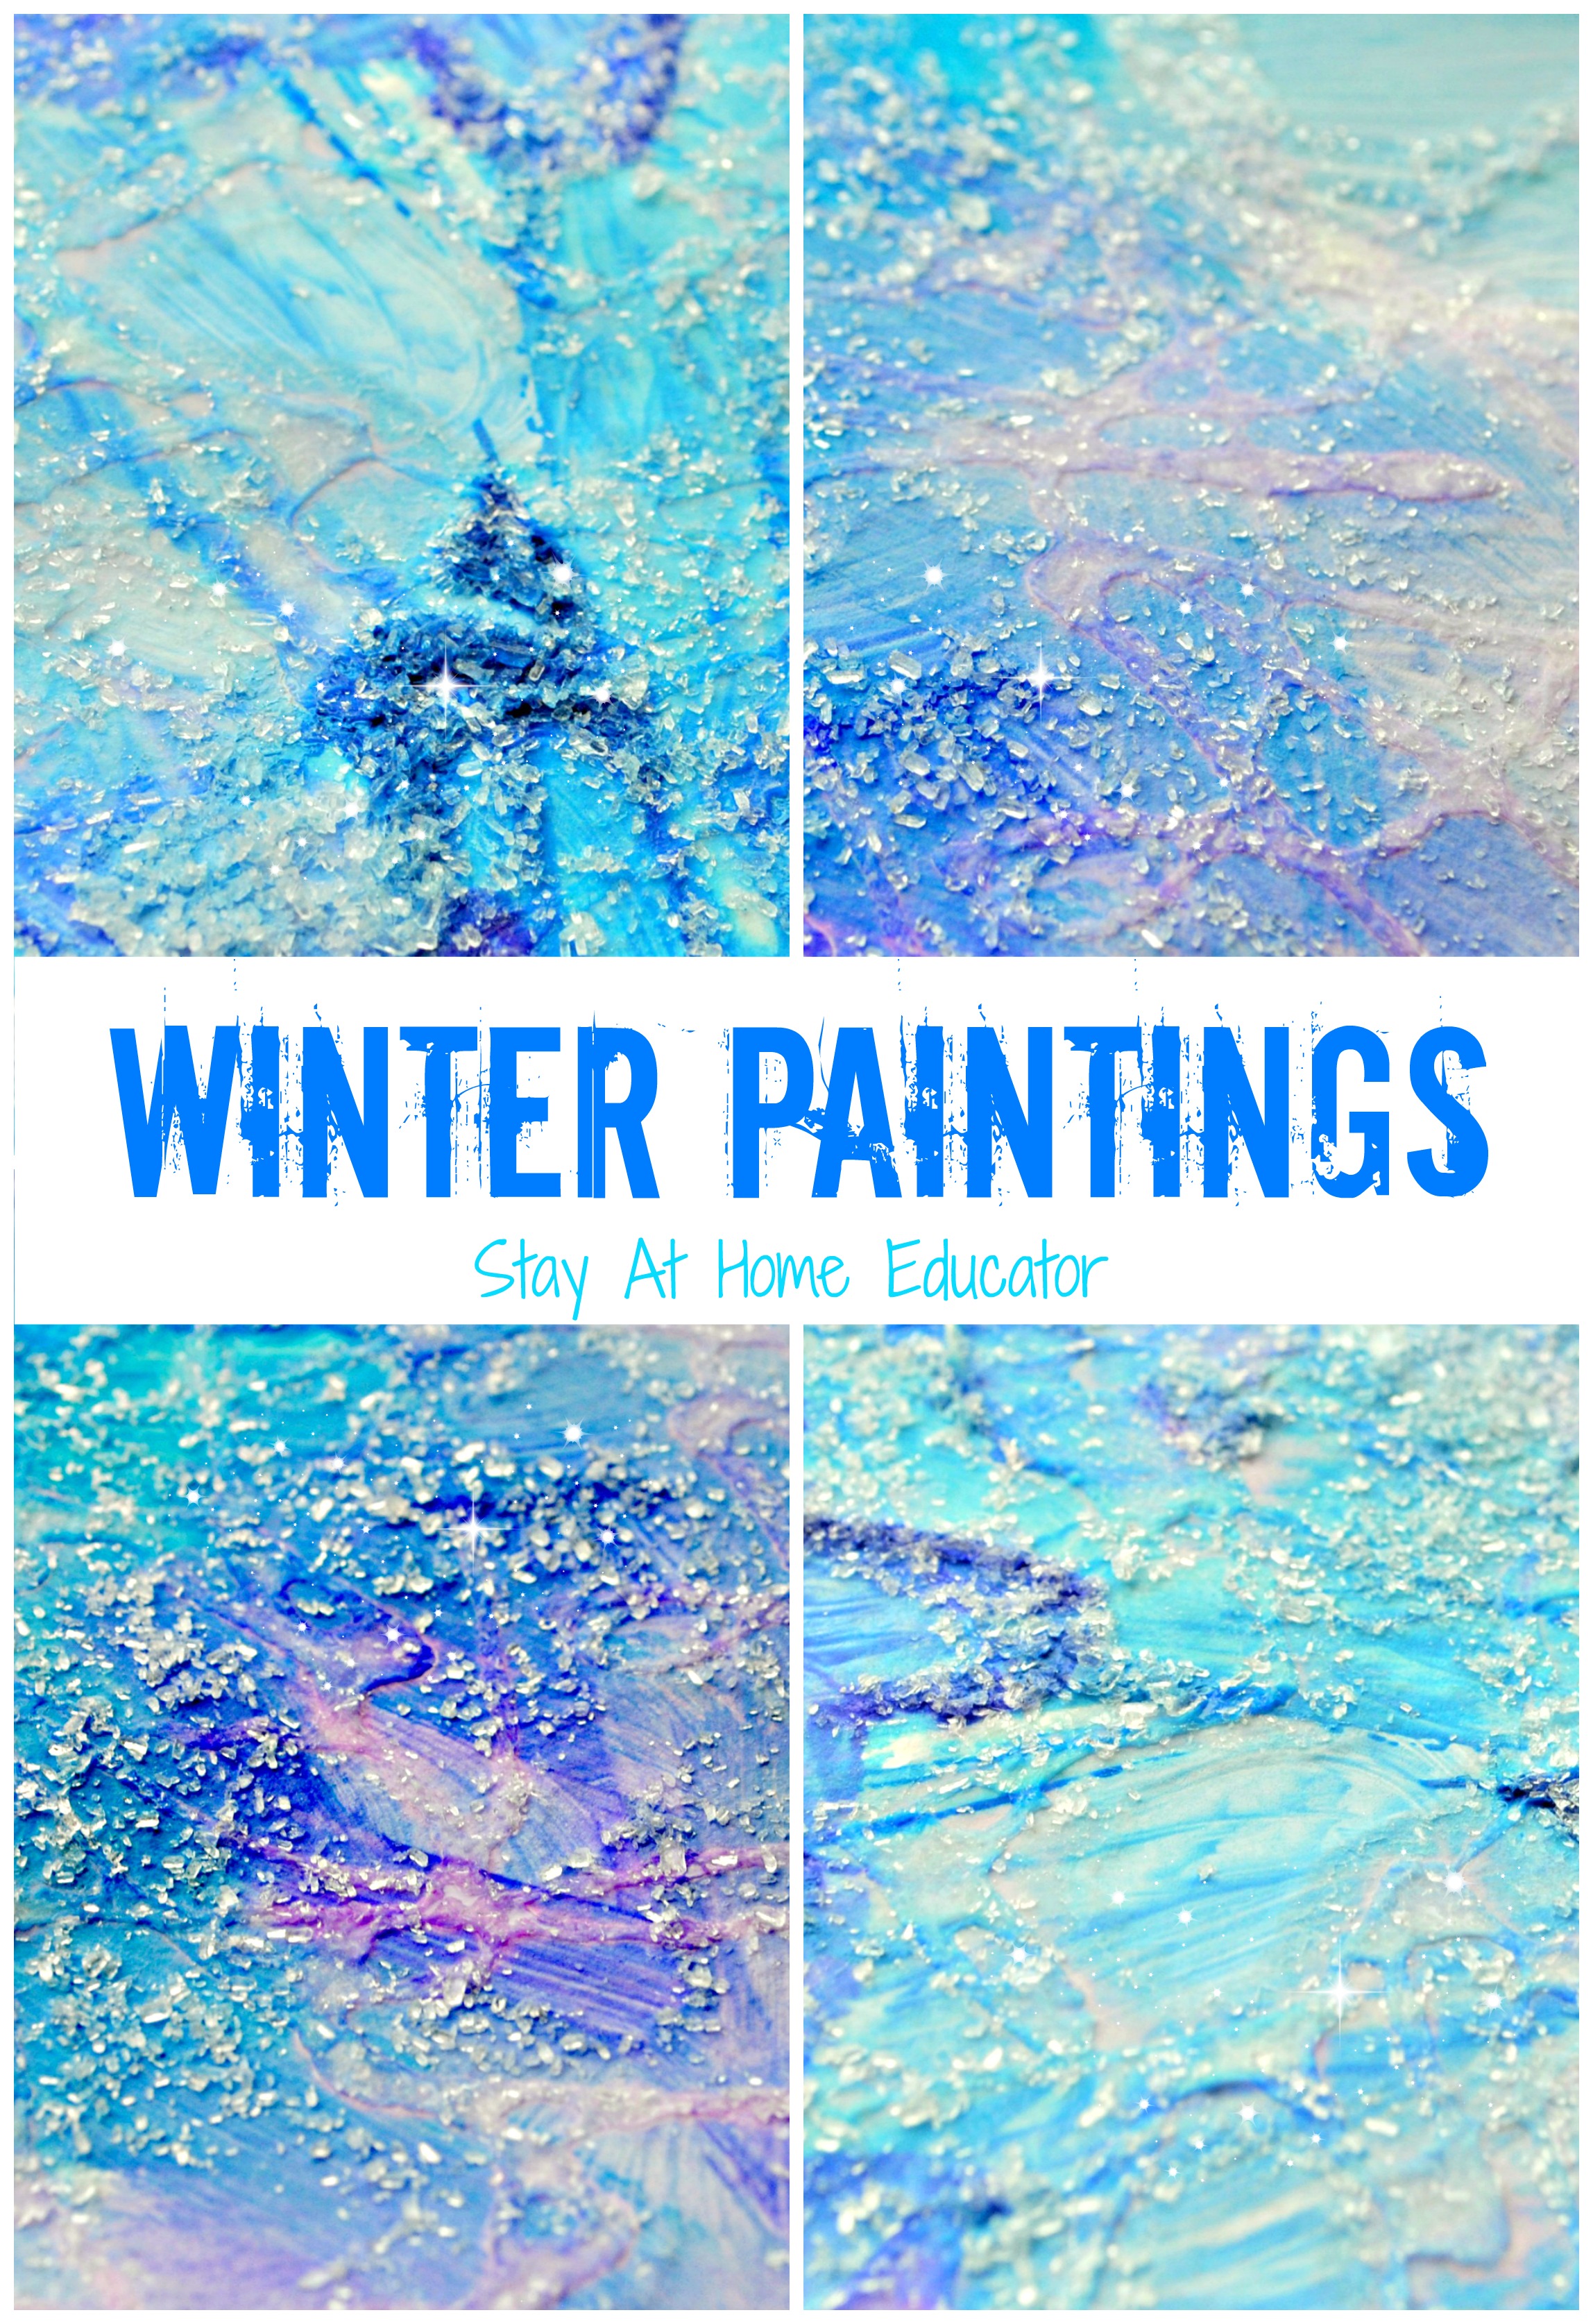 Sparkly Winter Process Art for Preschoolers - Process art is more about the process than the product, but this winter process art project for kids gives gorgeous results along with hand strengthening exercises - it's a win-win! This glitter free winter art project is great for all ages!